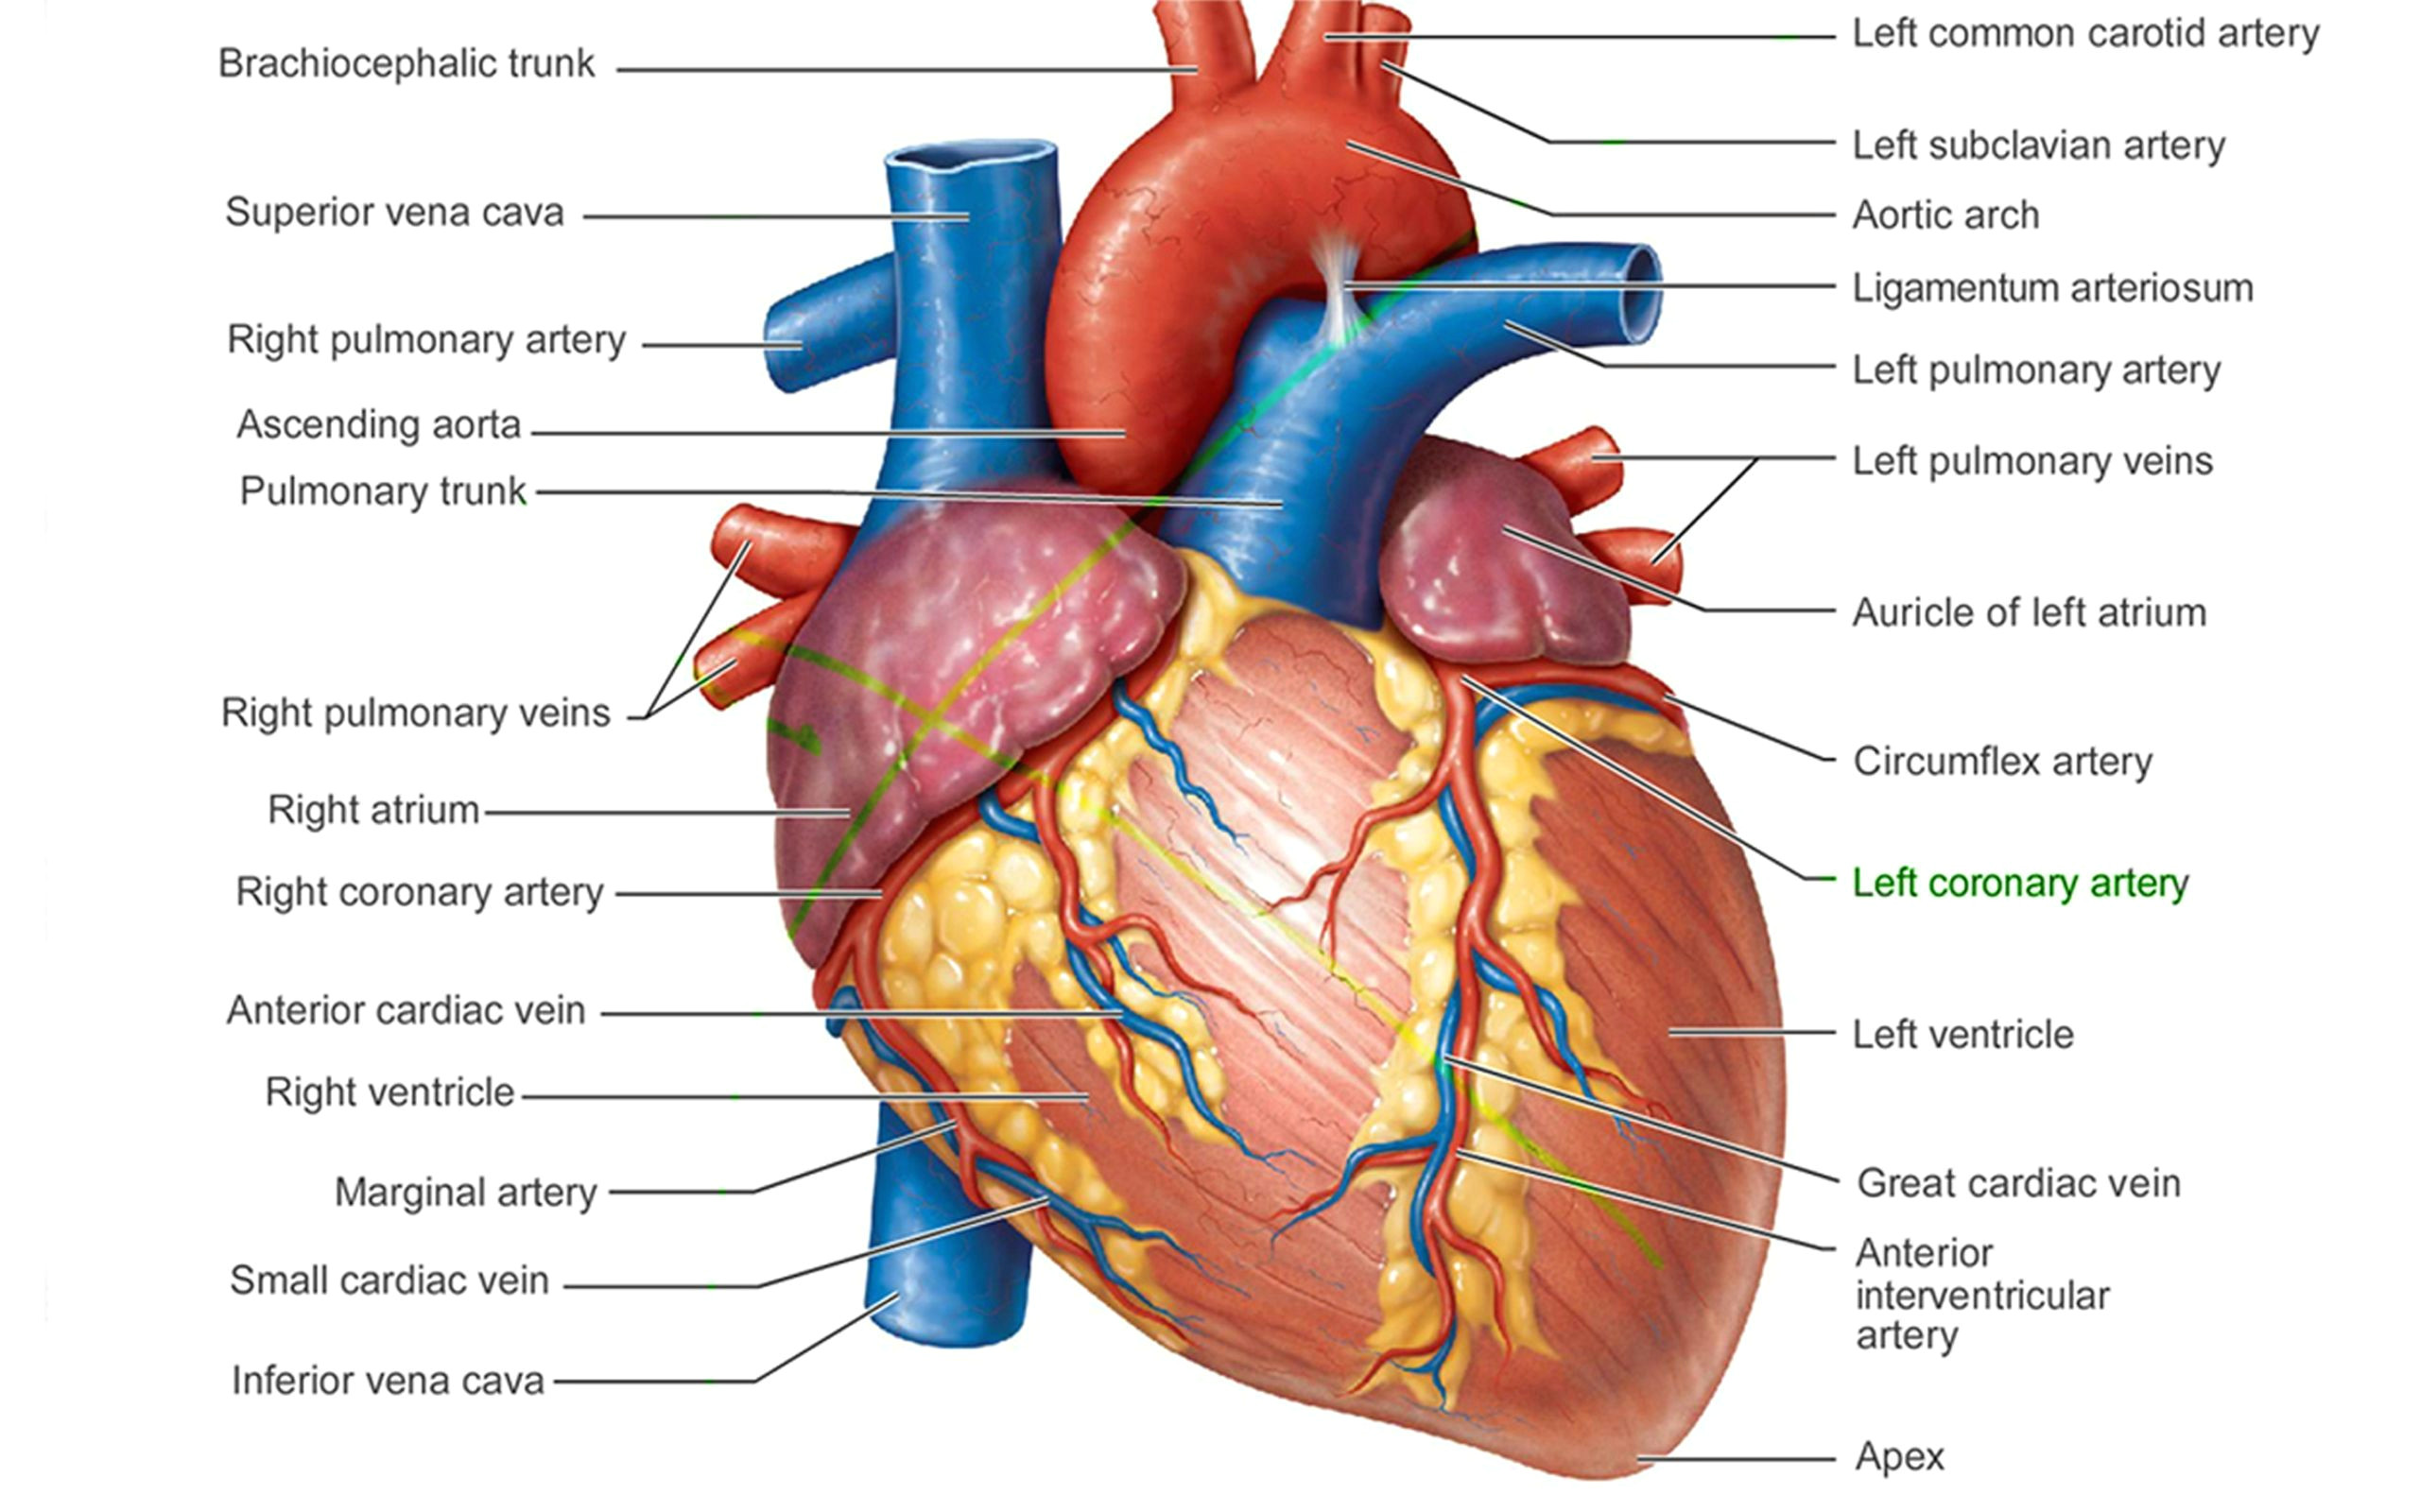 Labeled Drawing Of A Human Heart Pictures Of Human Heart Anatomy Anatomy Of the Human Heart 4k Ultra